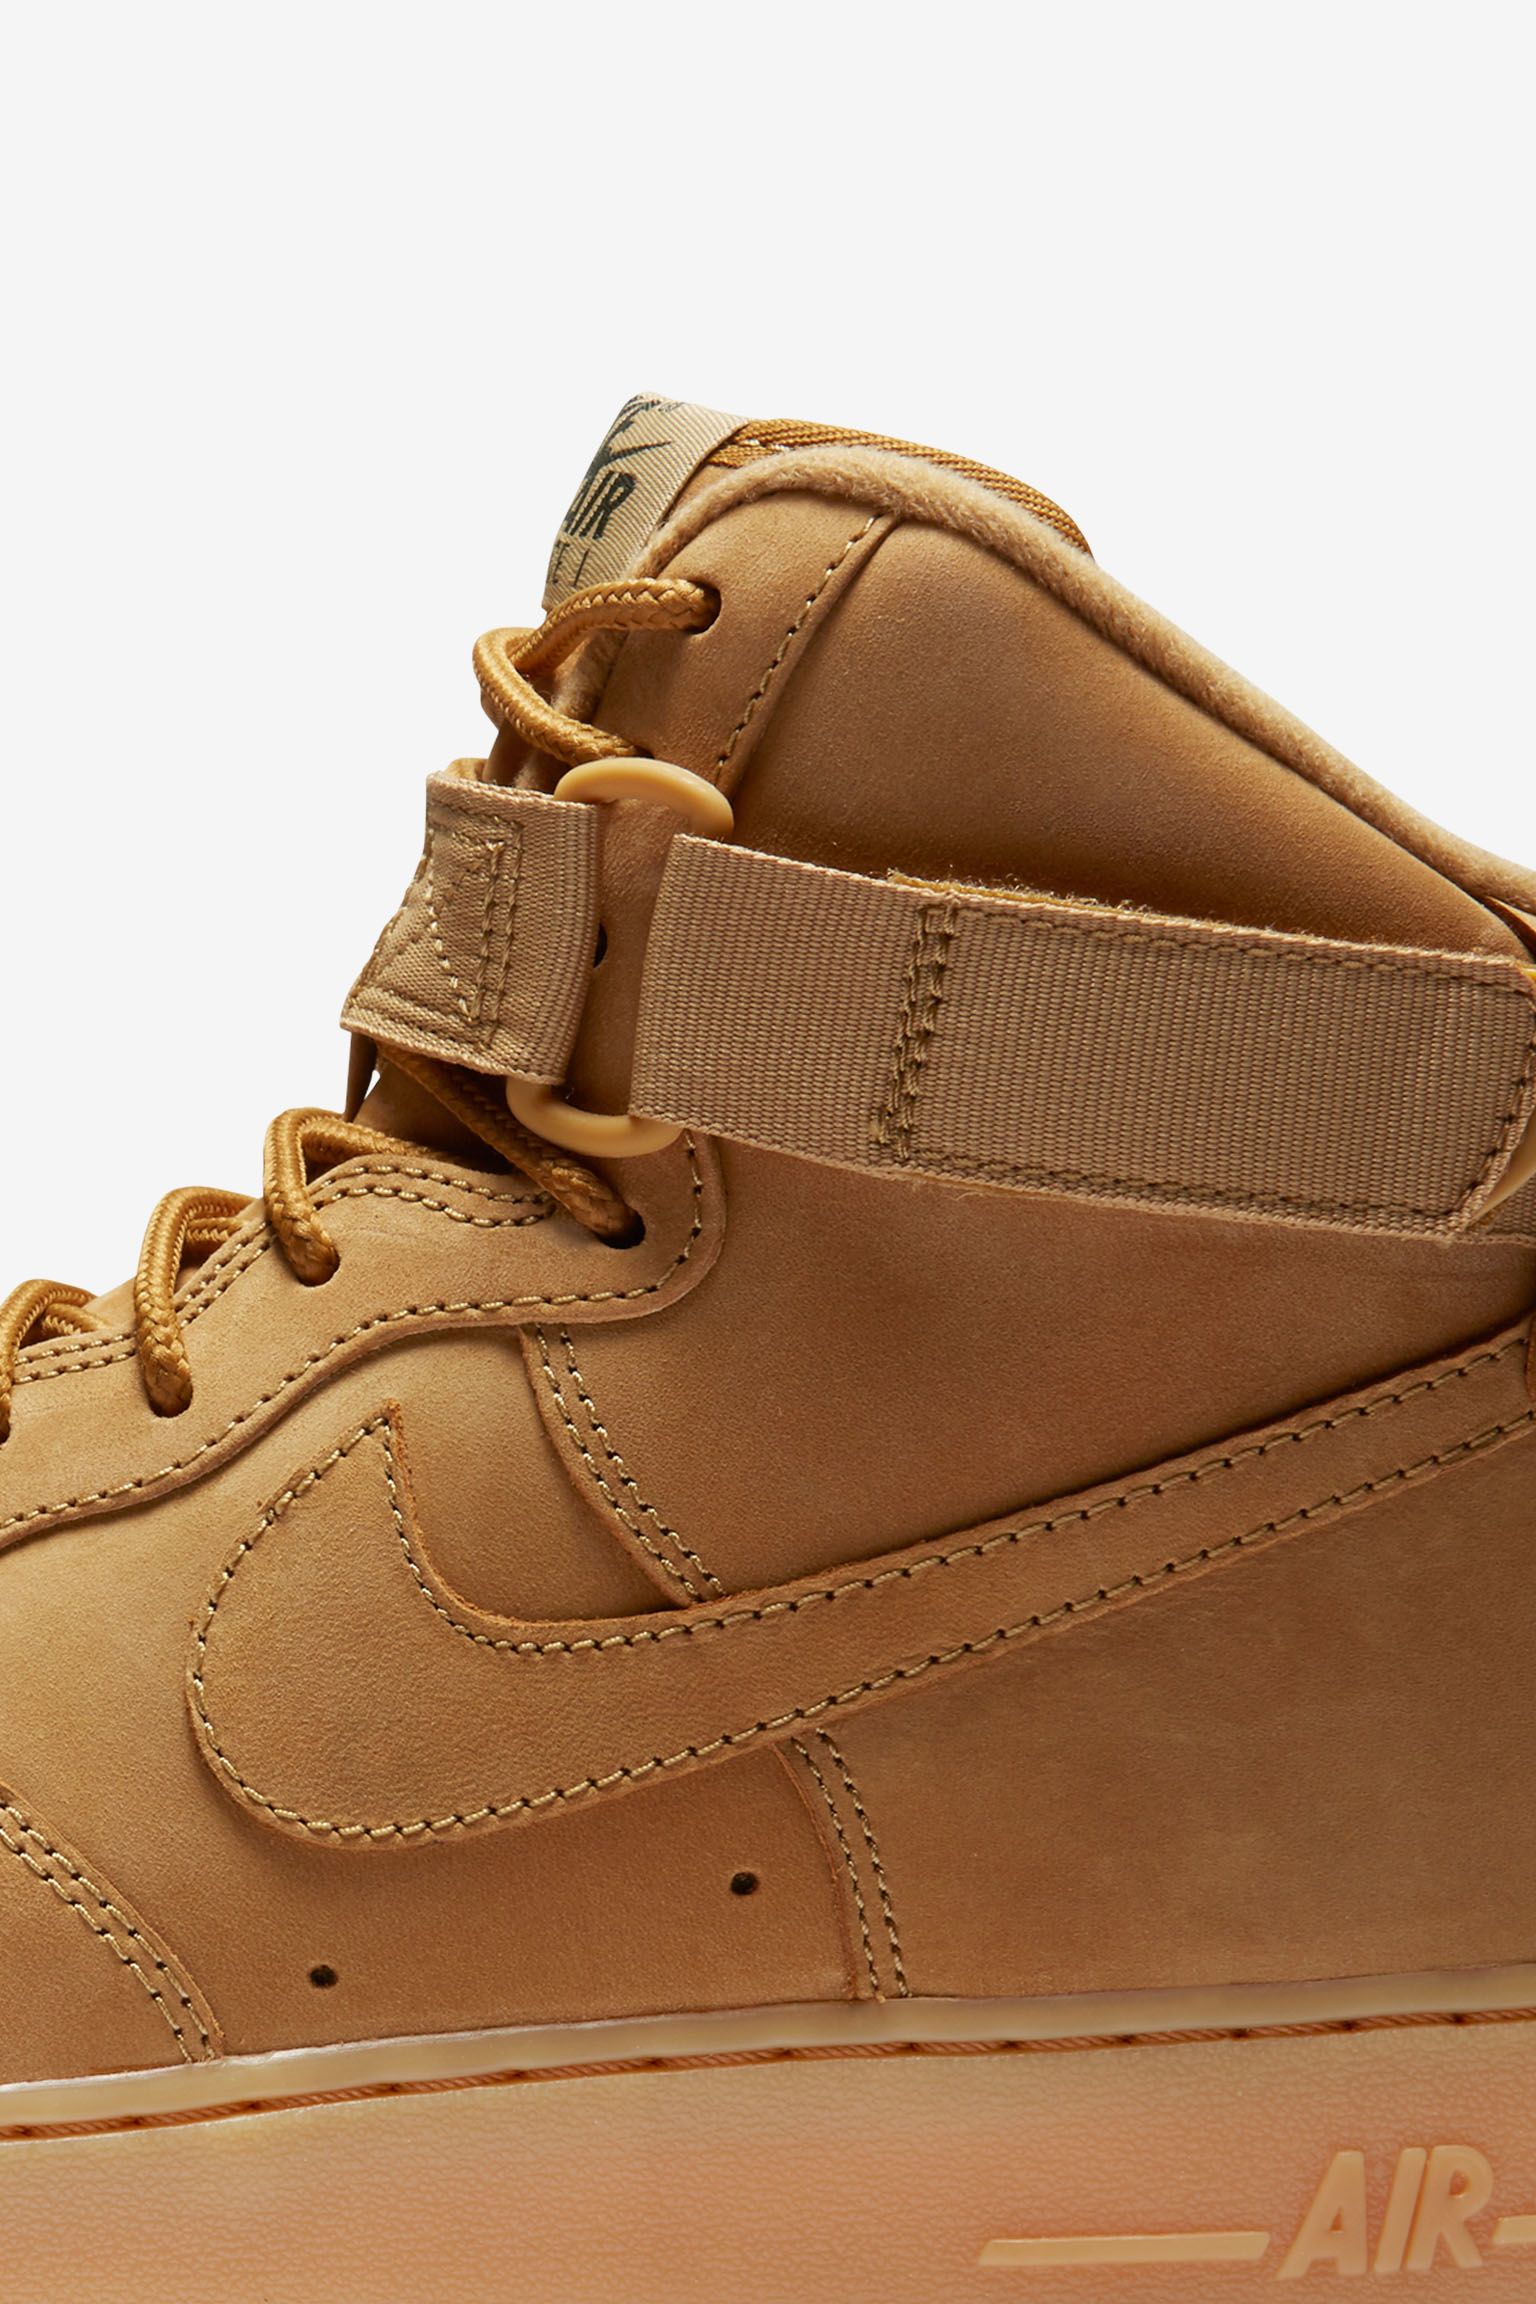 The Nike Air Force 1 High Flax Releases In November 